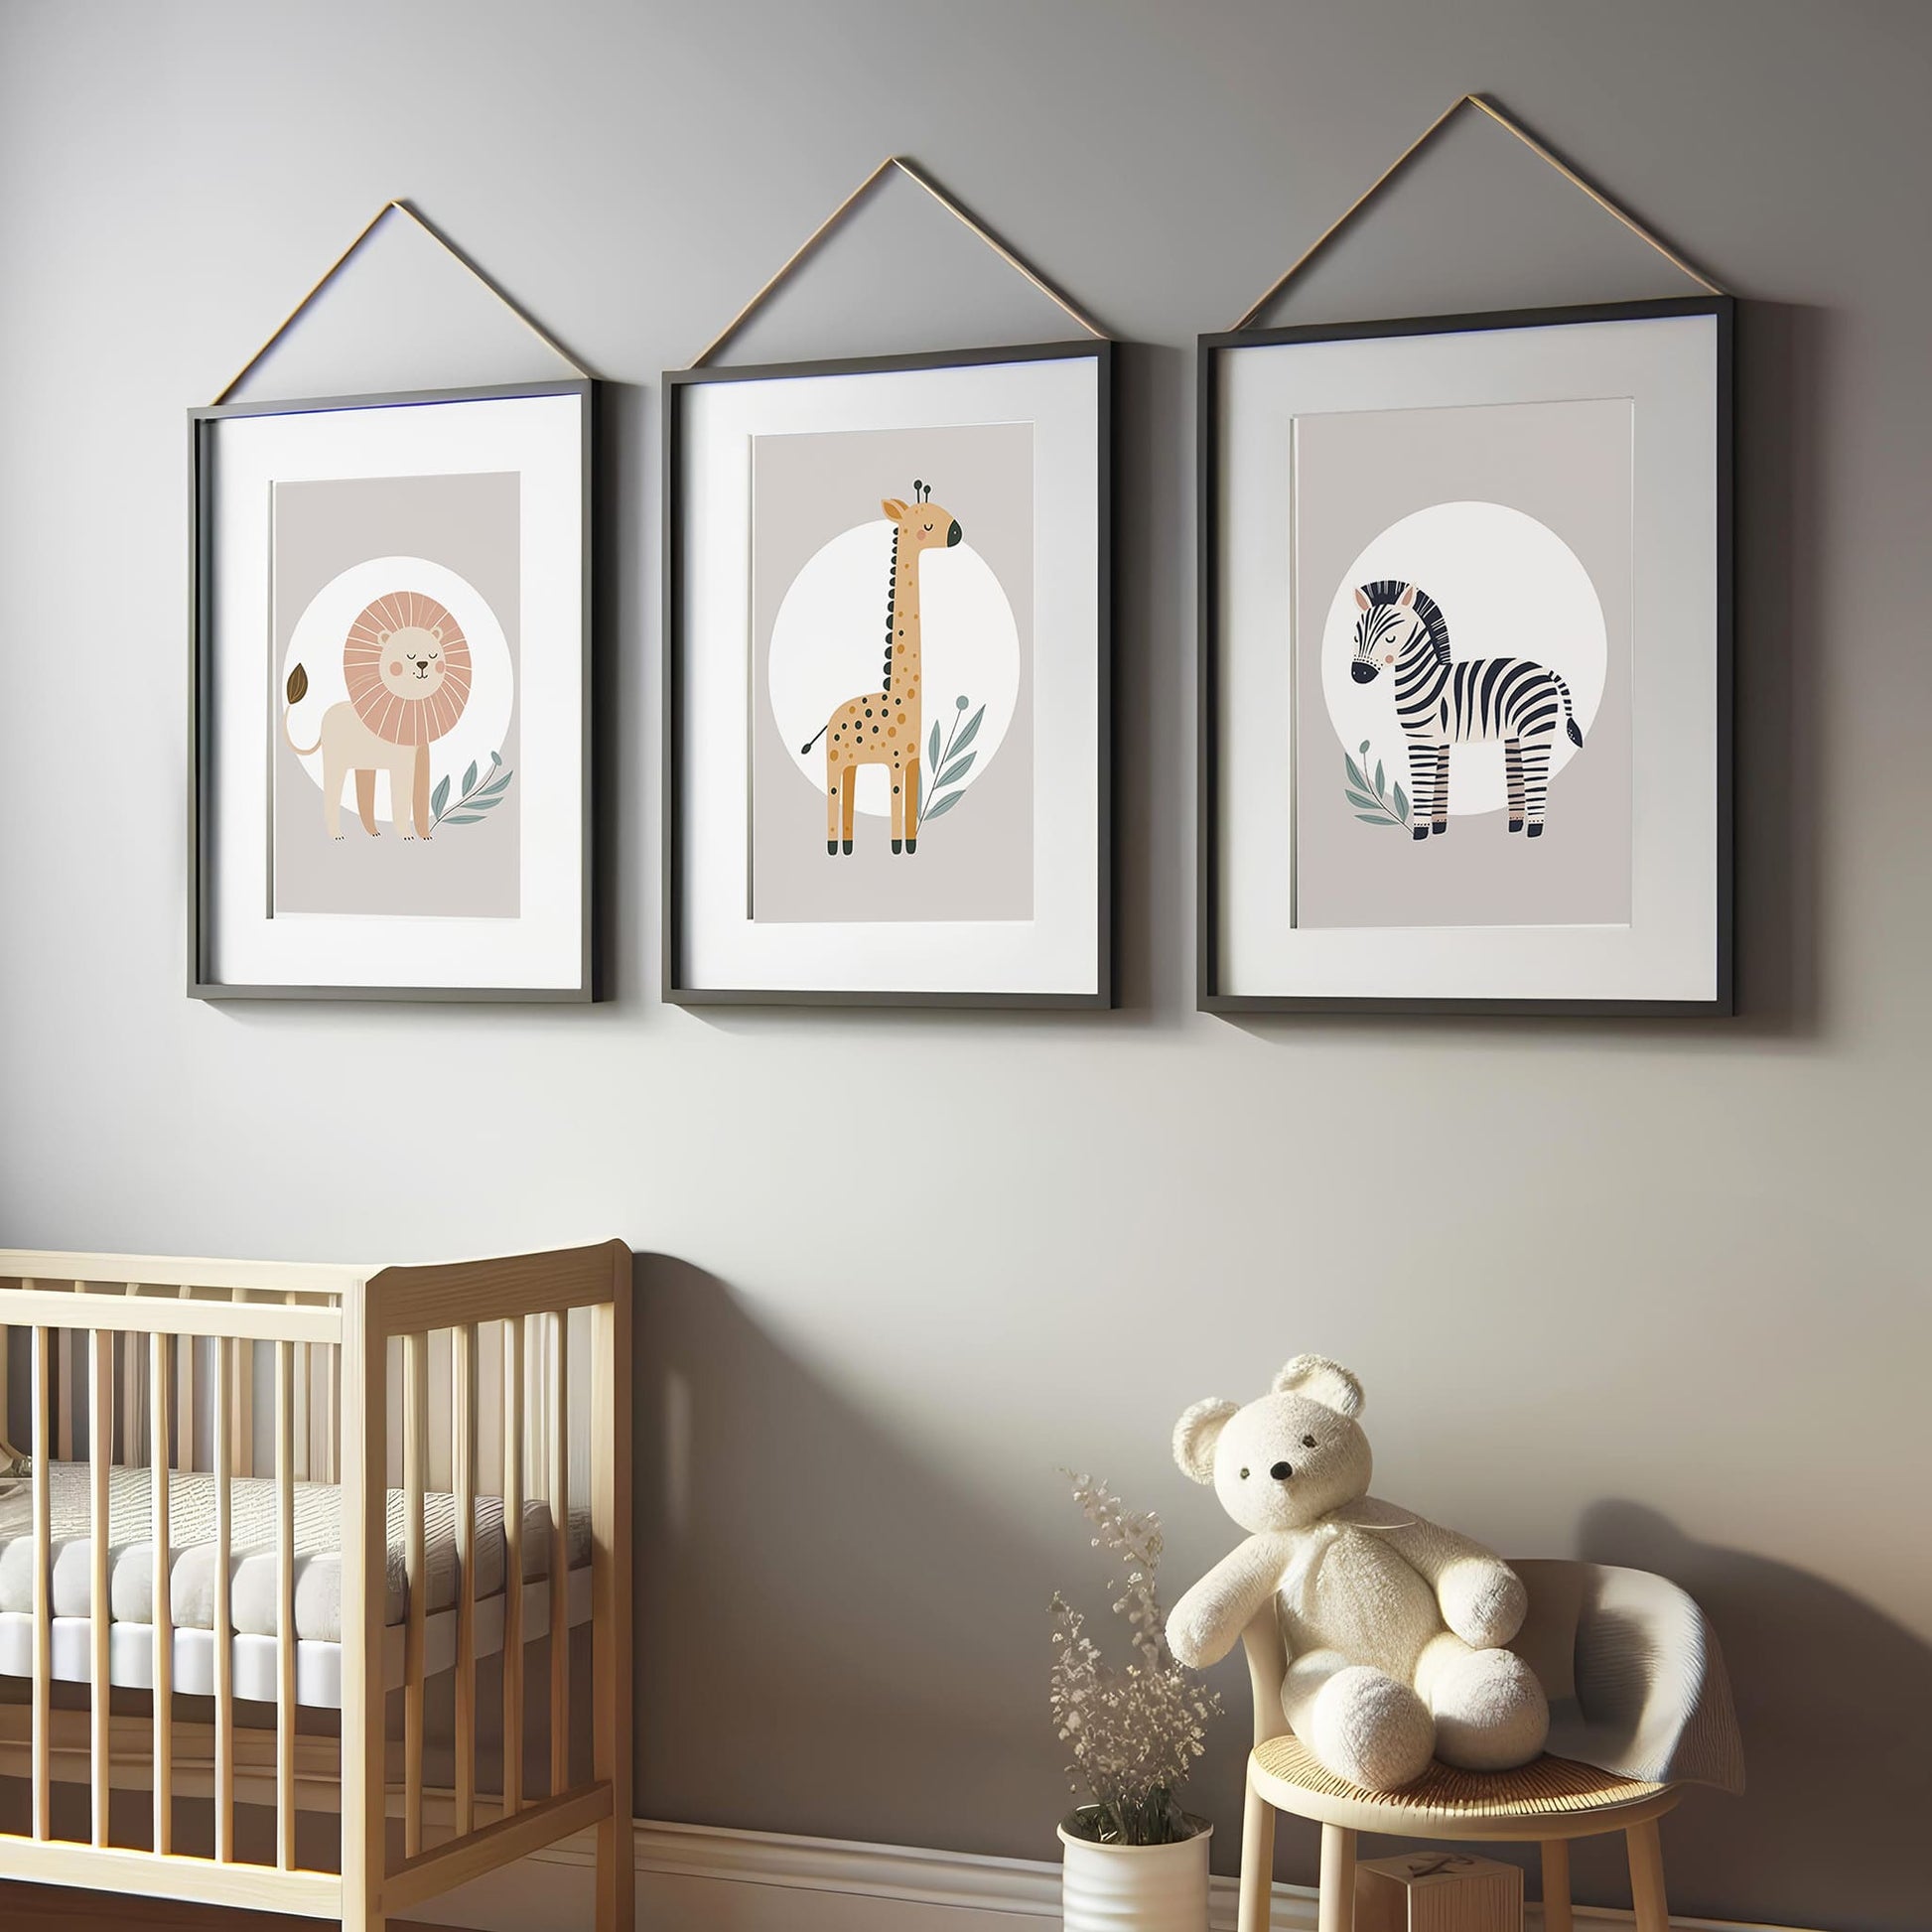 Set of three A4 prints featuring minimalist illustrations in muted tones. Each print depicts a different animal: a lion, a zebra, and a giraffe. The background is tan coloured with a white circle on which the animal is overlaid.